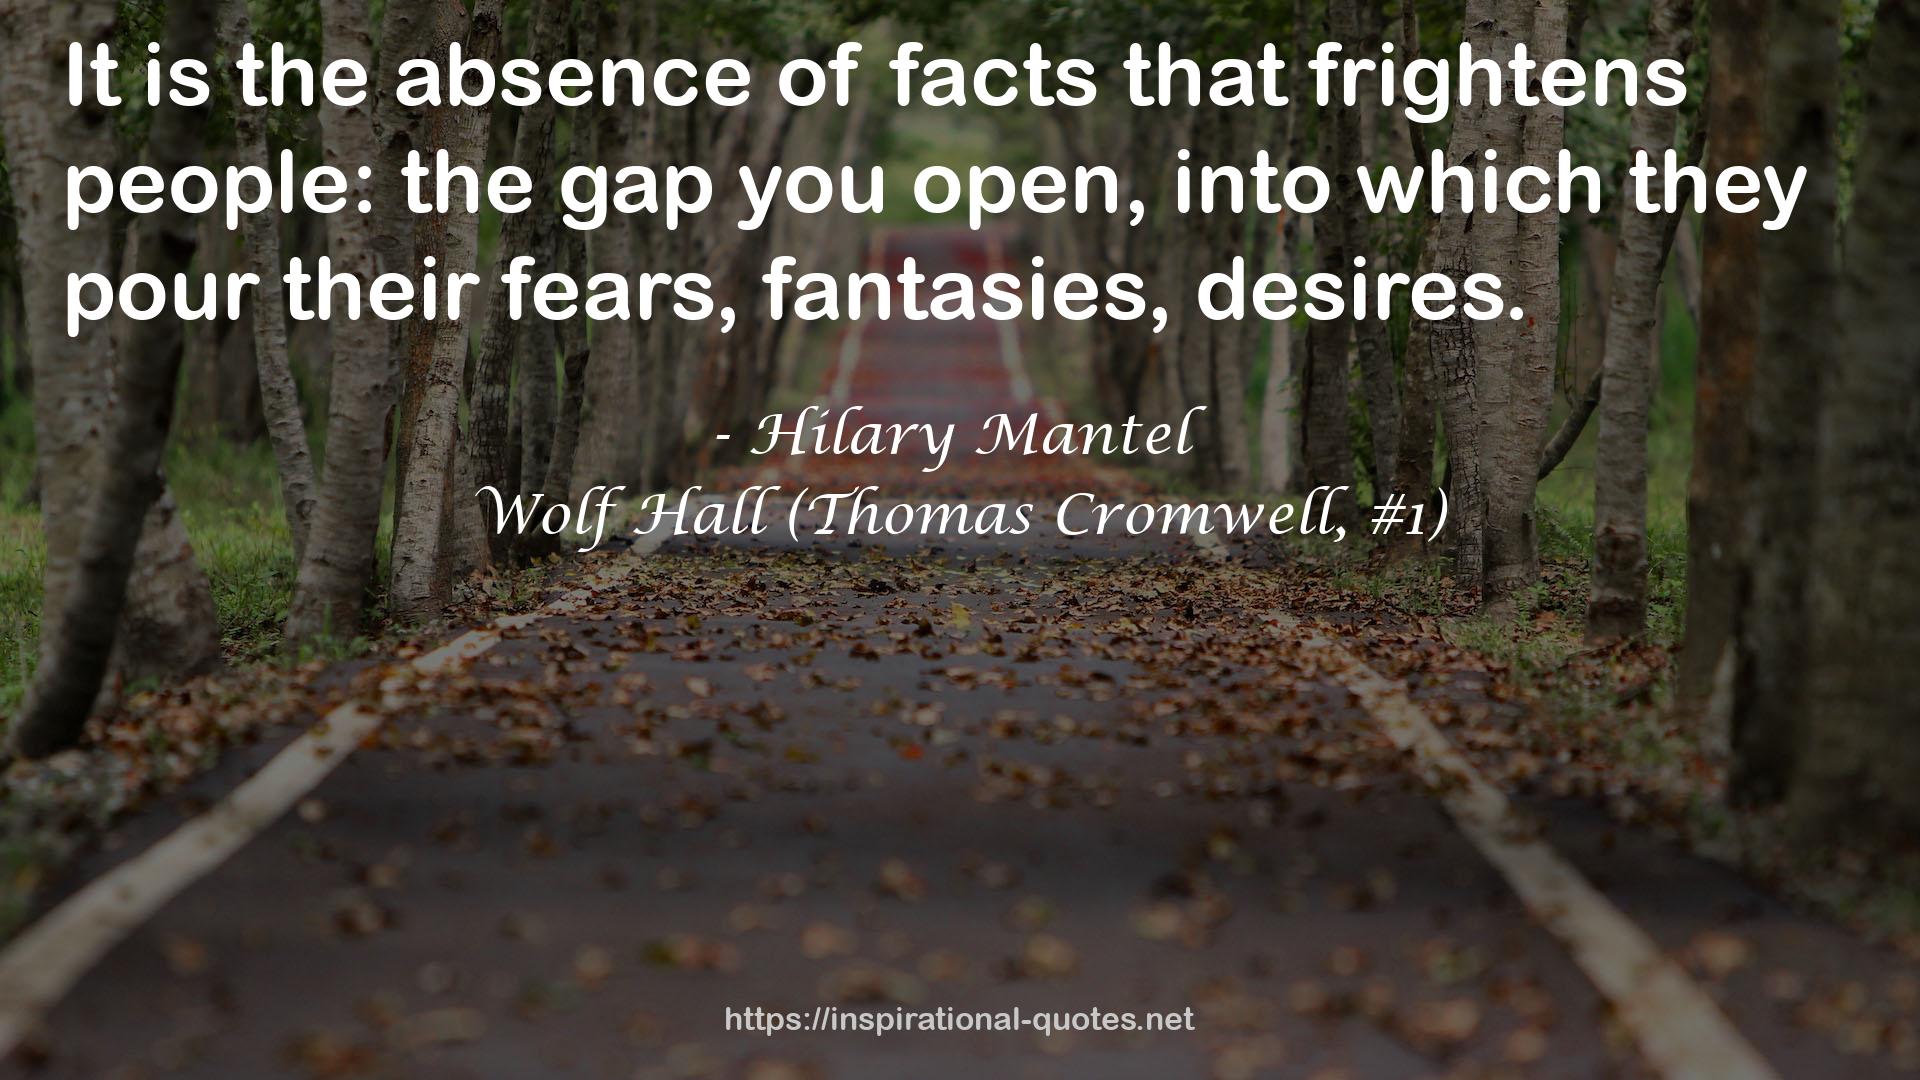 Wolf Hall (Thomas Cromwell, #1) QUOTES